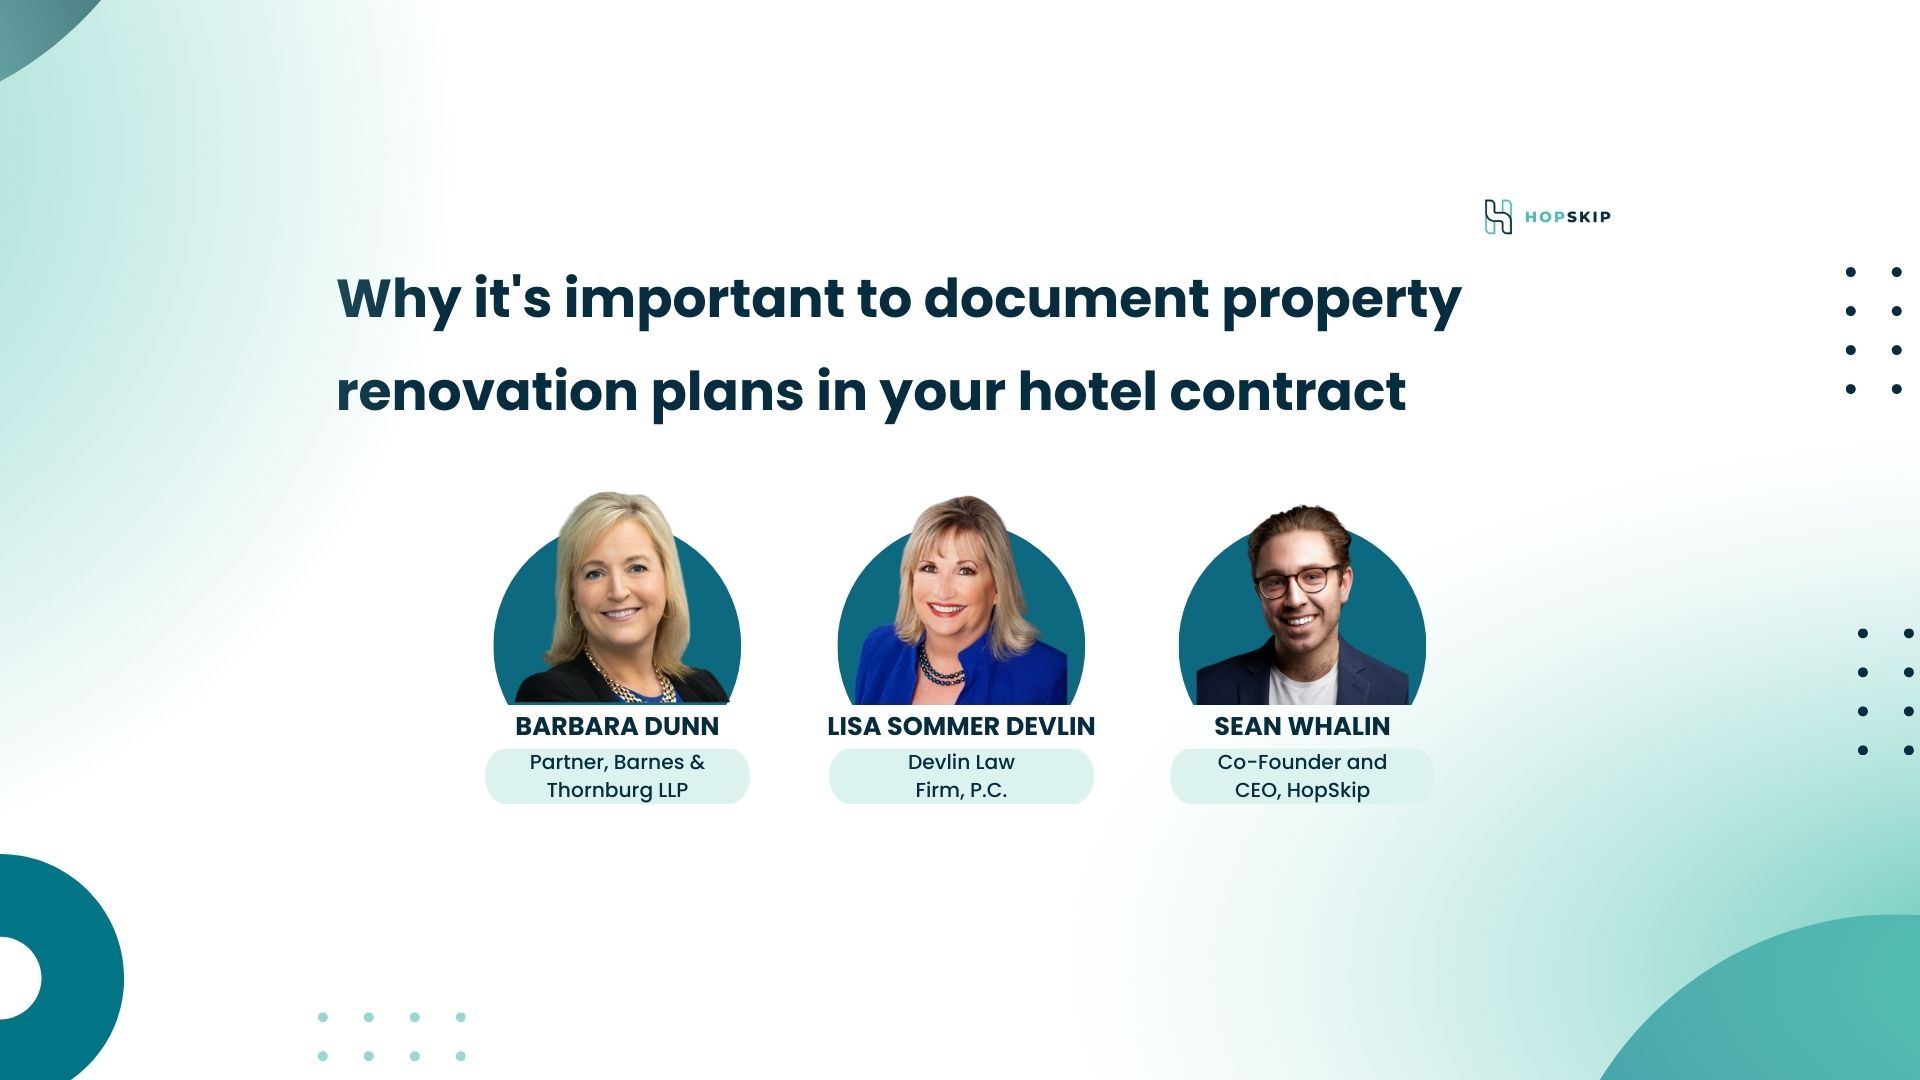 Renovation plans in hotel contracts